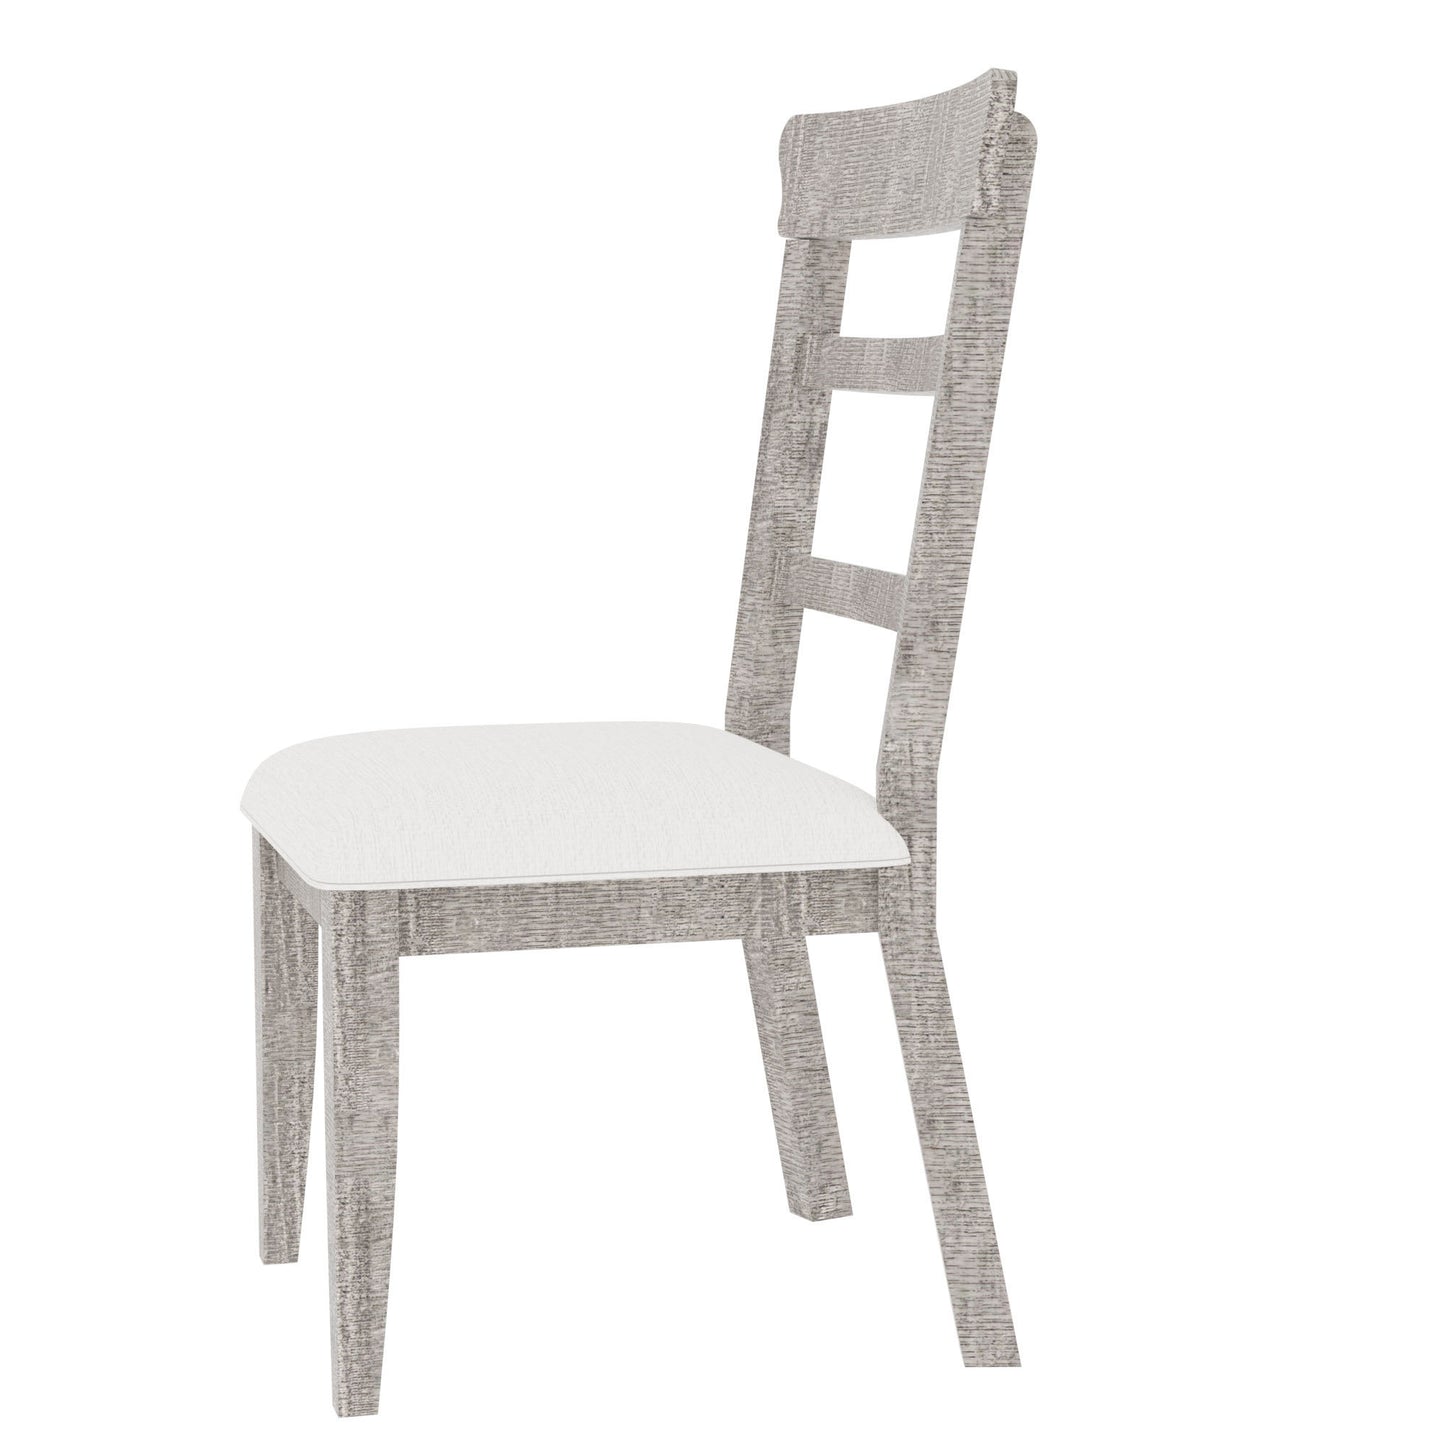 Set of 2 Upholstered Real Pine Wood Dining Chairs (19.1*24*37.4inch) Grey